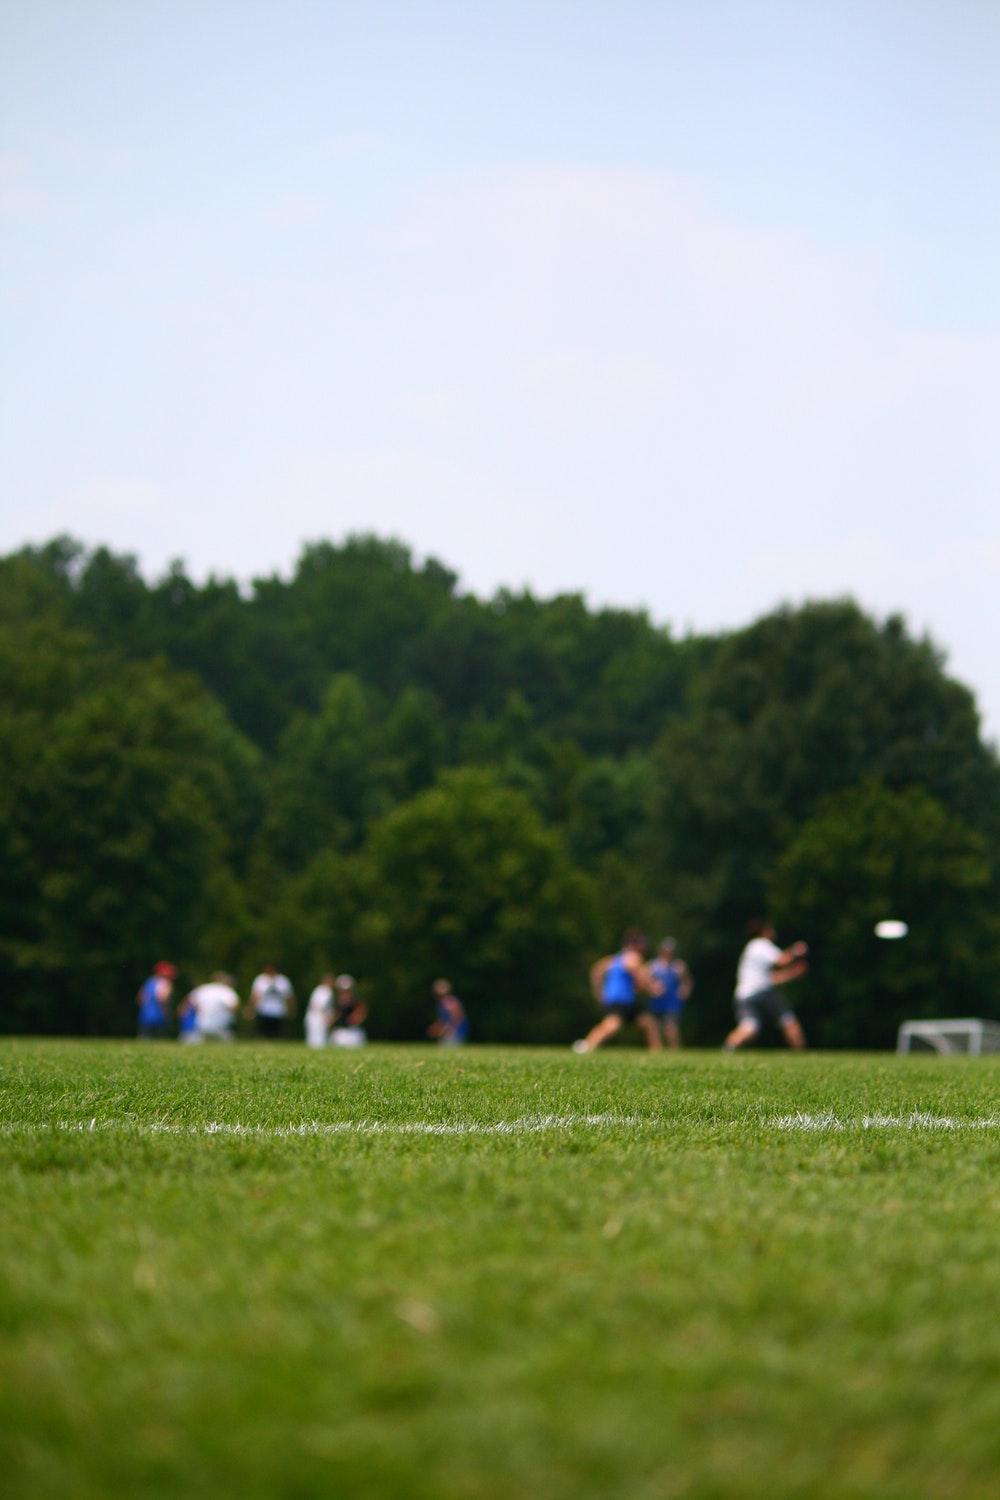 Ultimate Frisbee Picture. Download Free Image